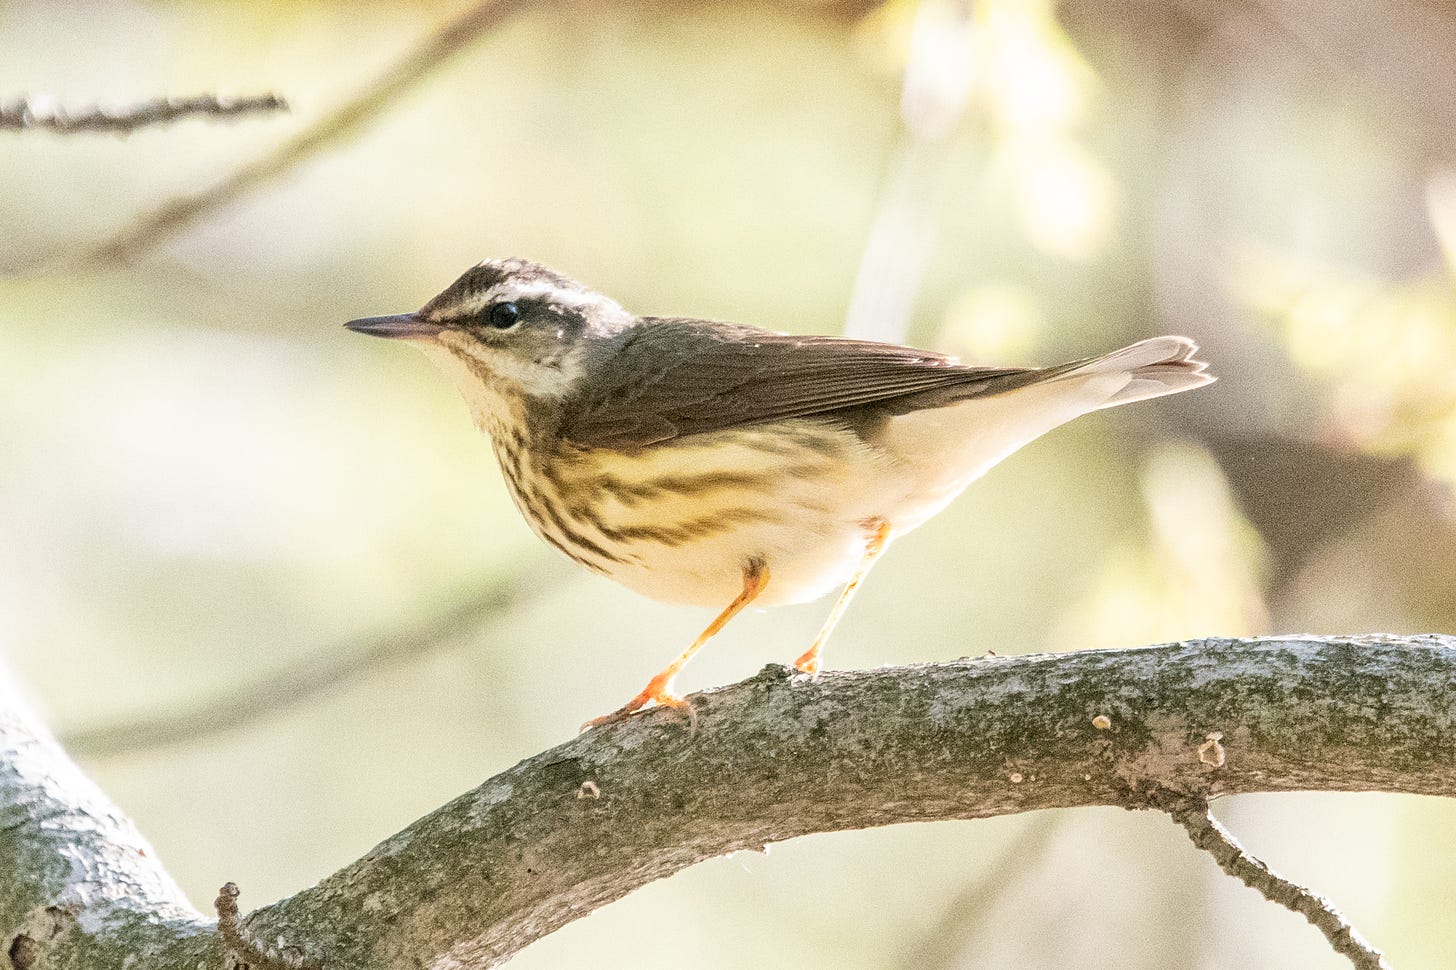 A Louisiana waterthrush, perched on a branch, in profile